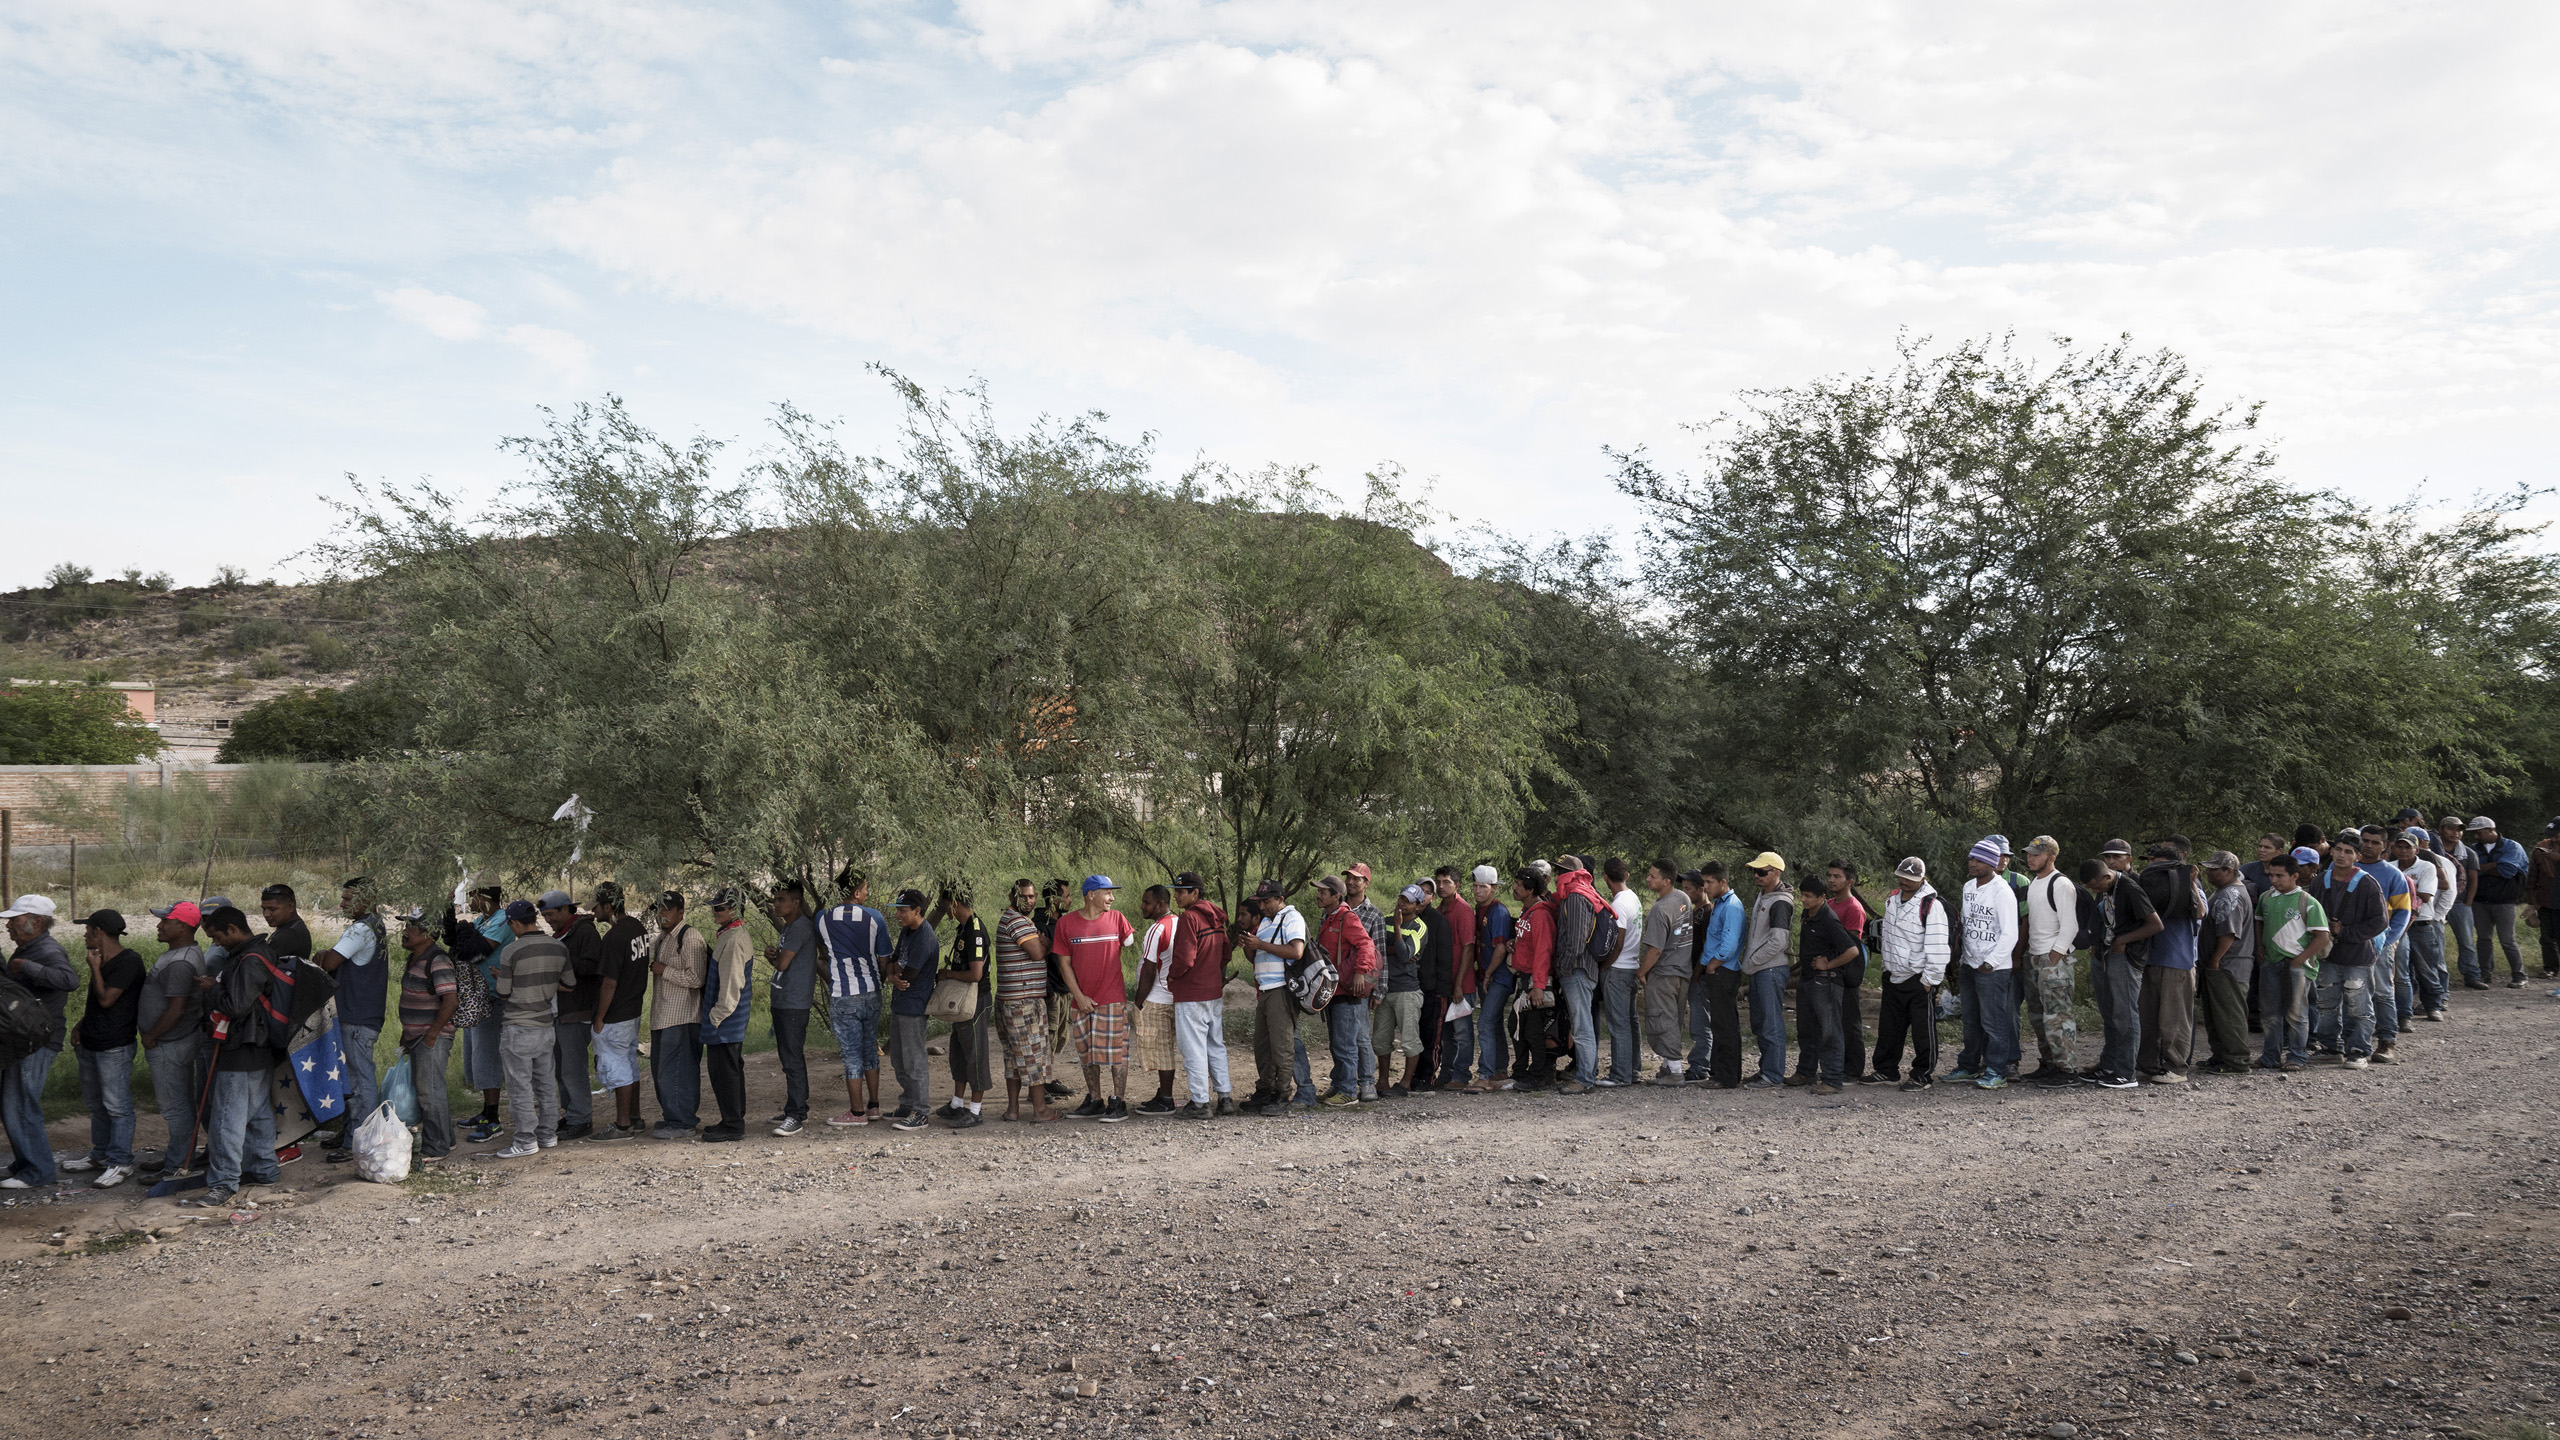 Illegal Central American and Mexican migrants wait in line for a hot meal delivered every morning by a group of volunteers from the city of Caborca. Caborca, Sonora, Mexico. Oct. 6, 2016.